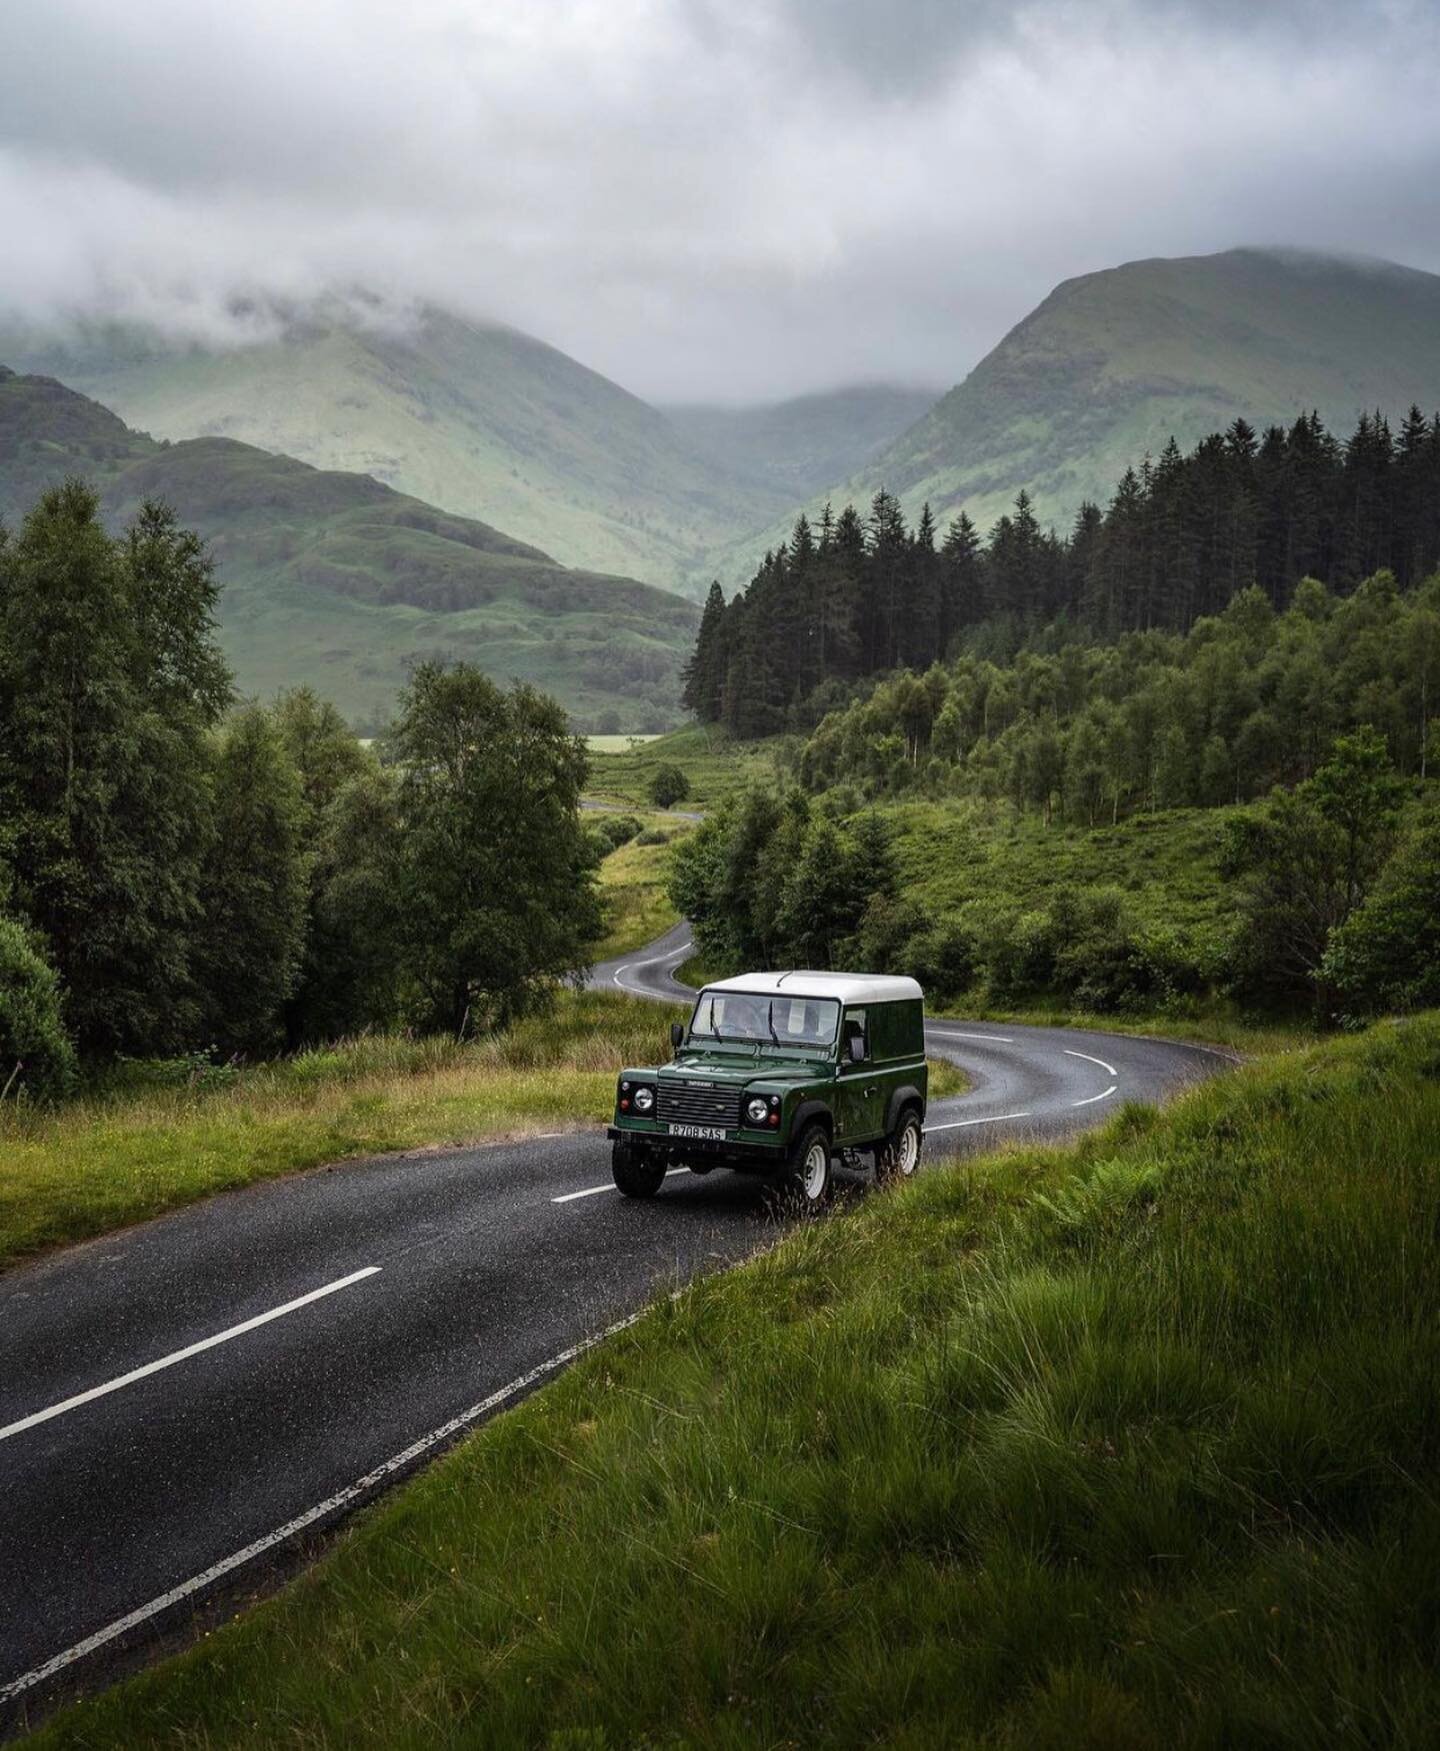 Scotland is made for road trips. 

Sweeping roads wind their way through dramatic and moody landscapes, past historic castles and cities, gentle lochs and glens, beautiful coastlines and wild seas.

As you road trip through Scotland, you&rsquo;ll fin